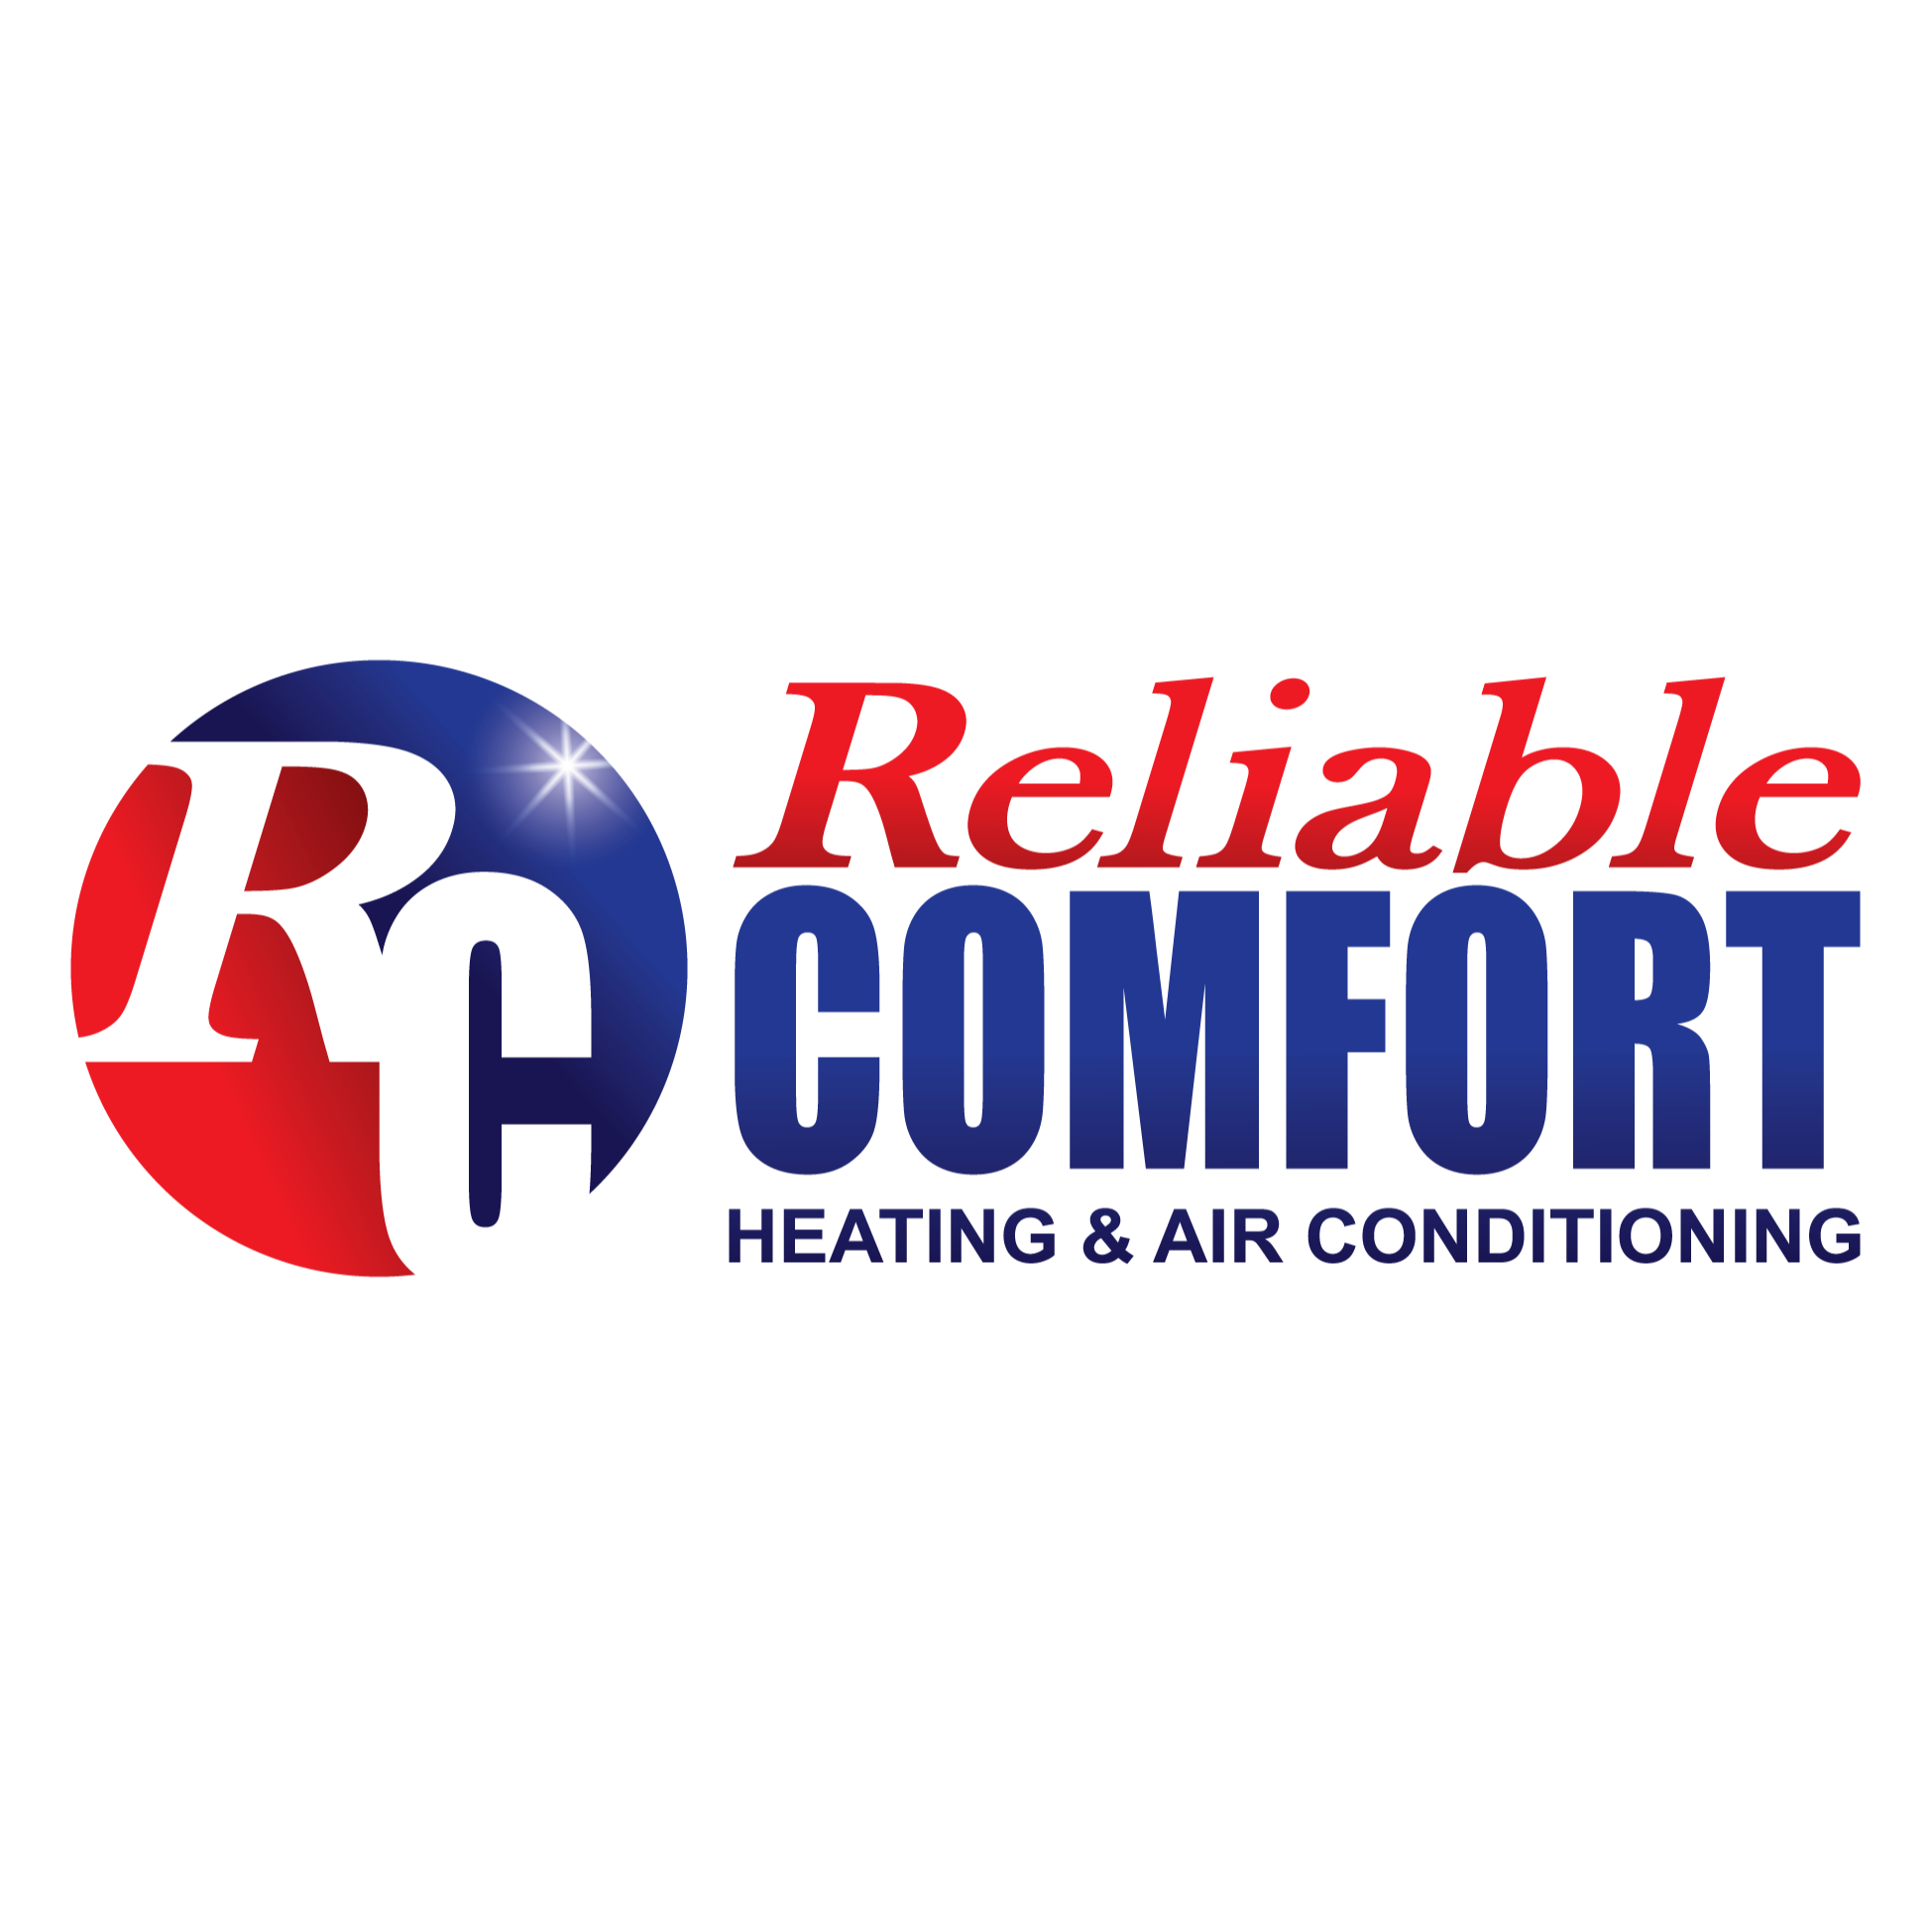 Reliable Comfort Heating & Air Conditioning Logo